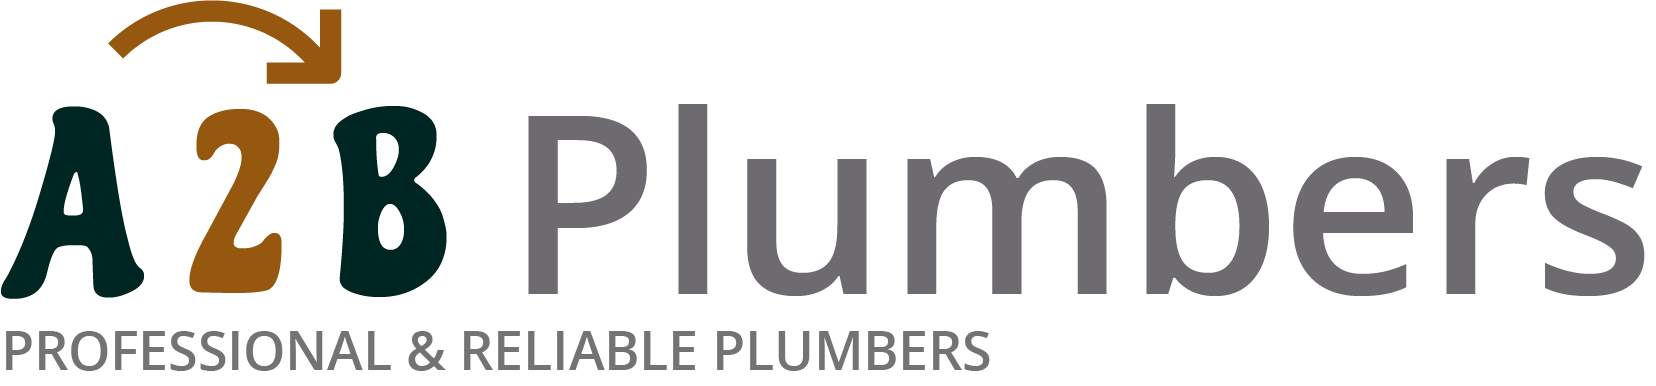 If you need a boiler installed, a radiator repaired or a leaking tap fixed, call us now - we provide services for properties in Poulton Le Fylde and the local area.